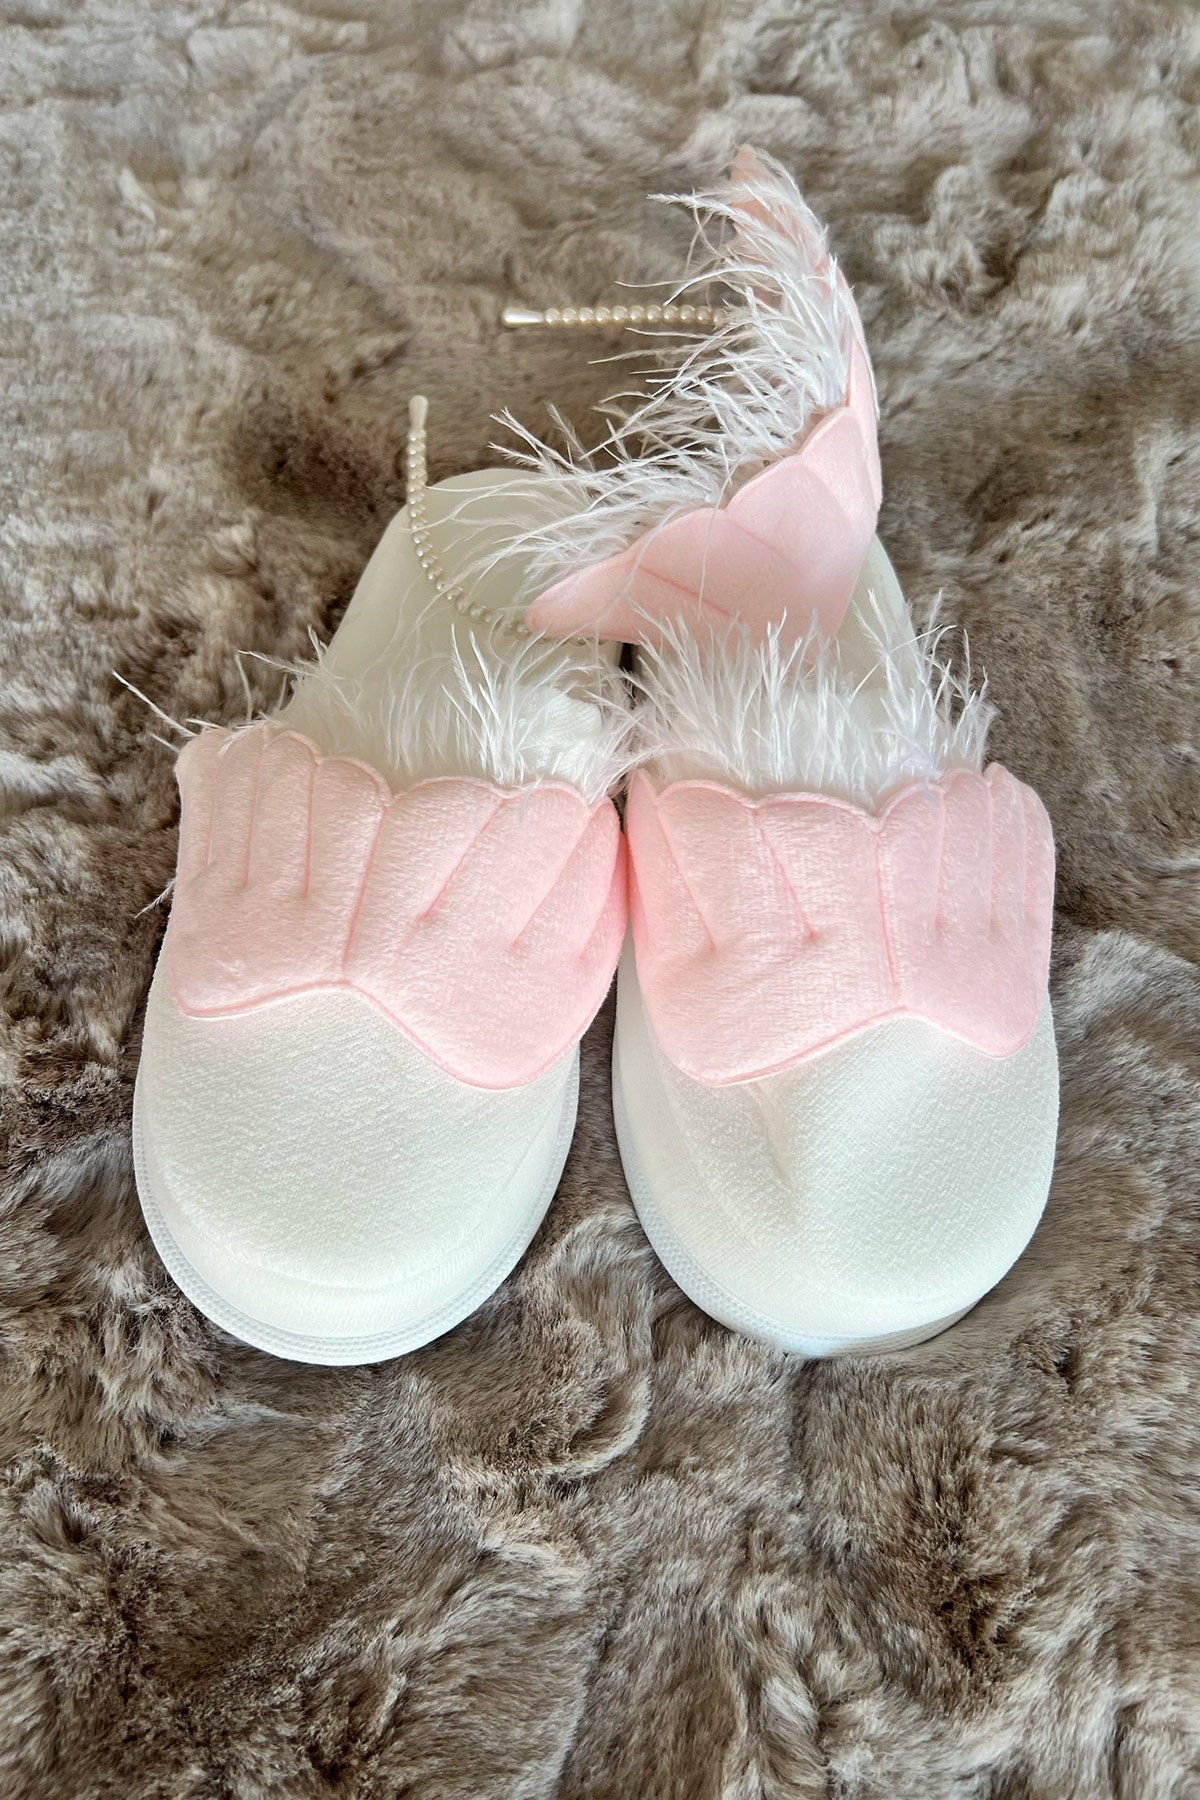 Shopymommy 757107 Angel Wing Maternity Crown & Maternity Slippers Set Pink